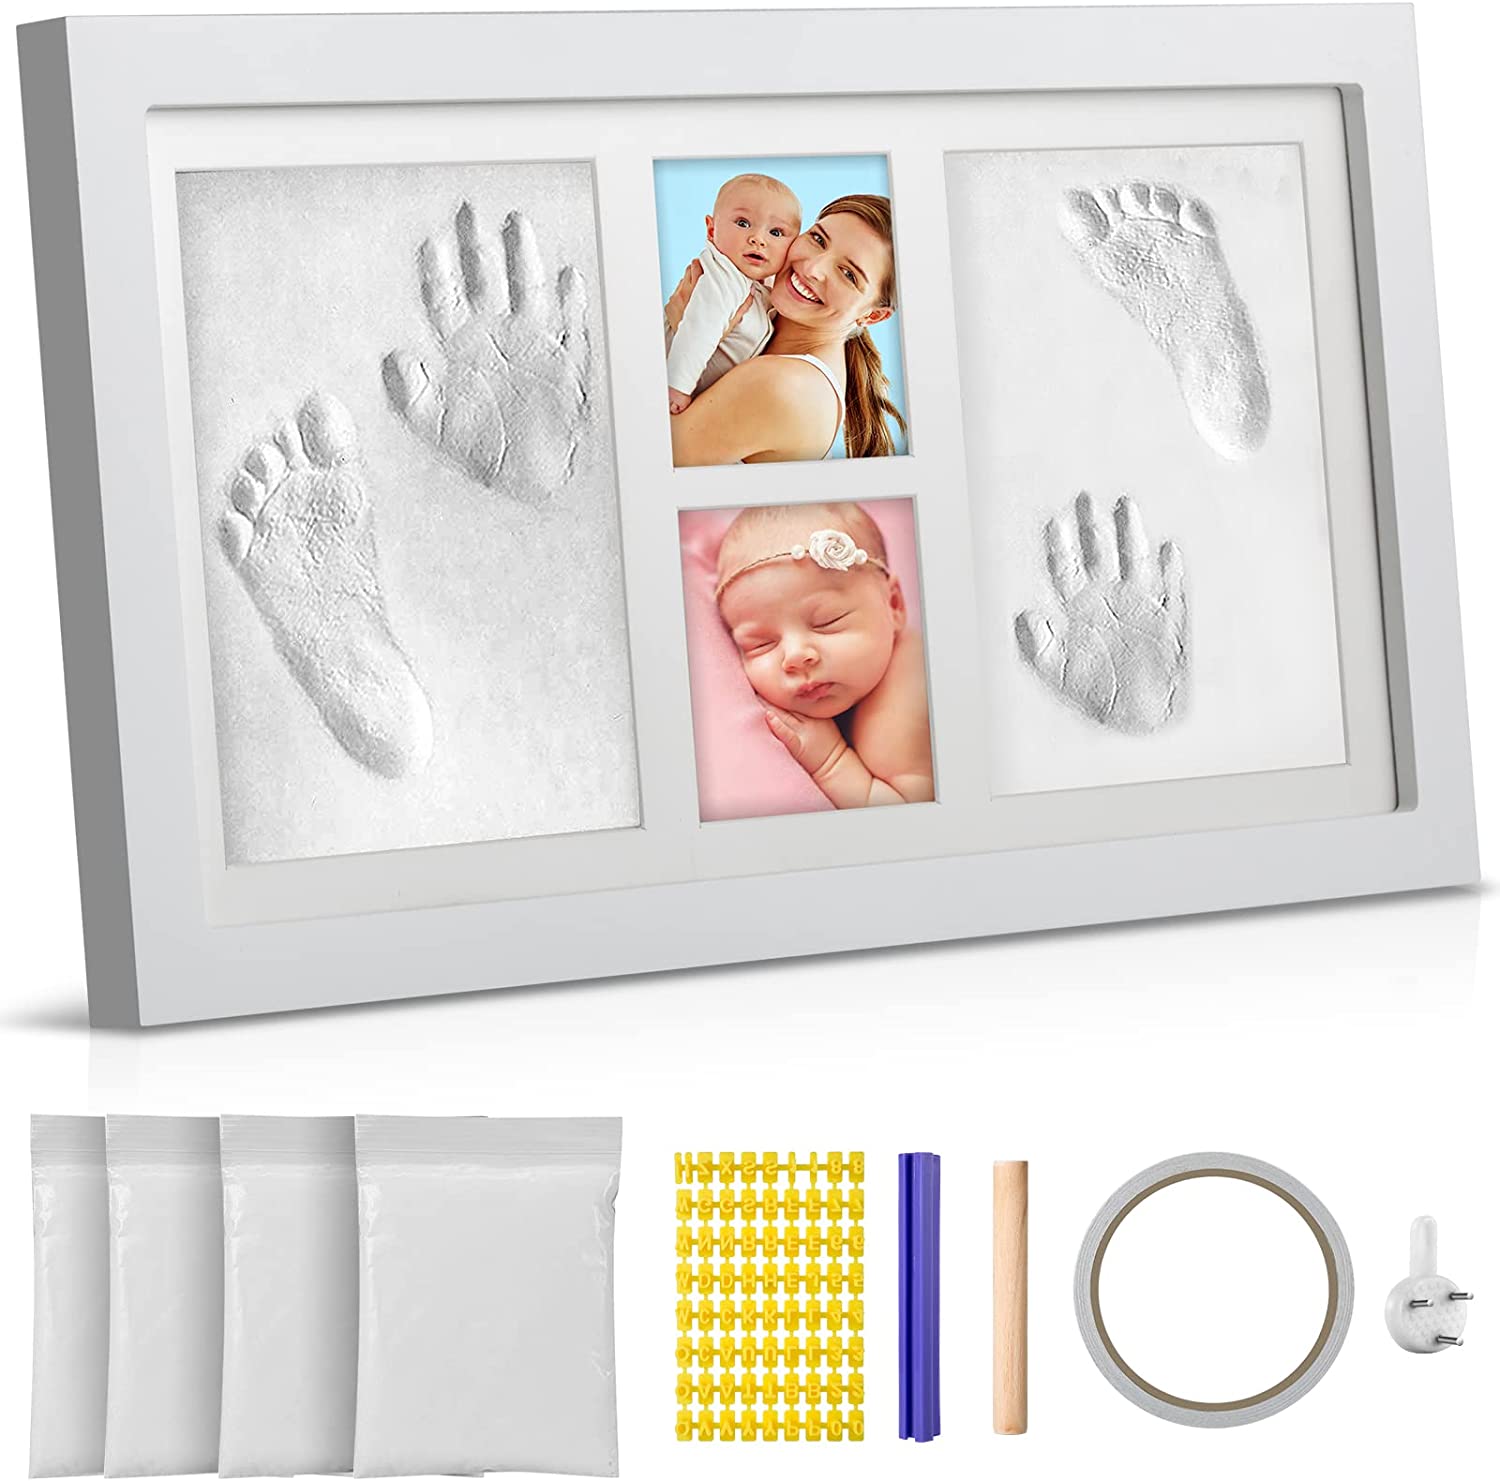 twin-mom-gifts-frame